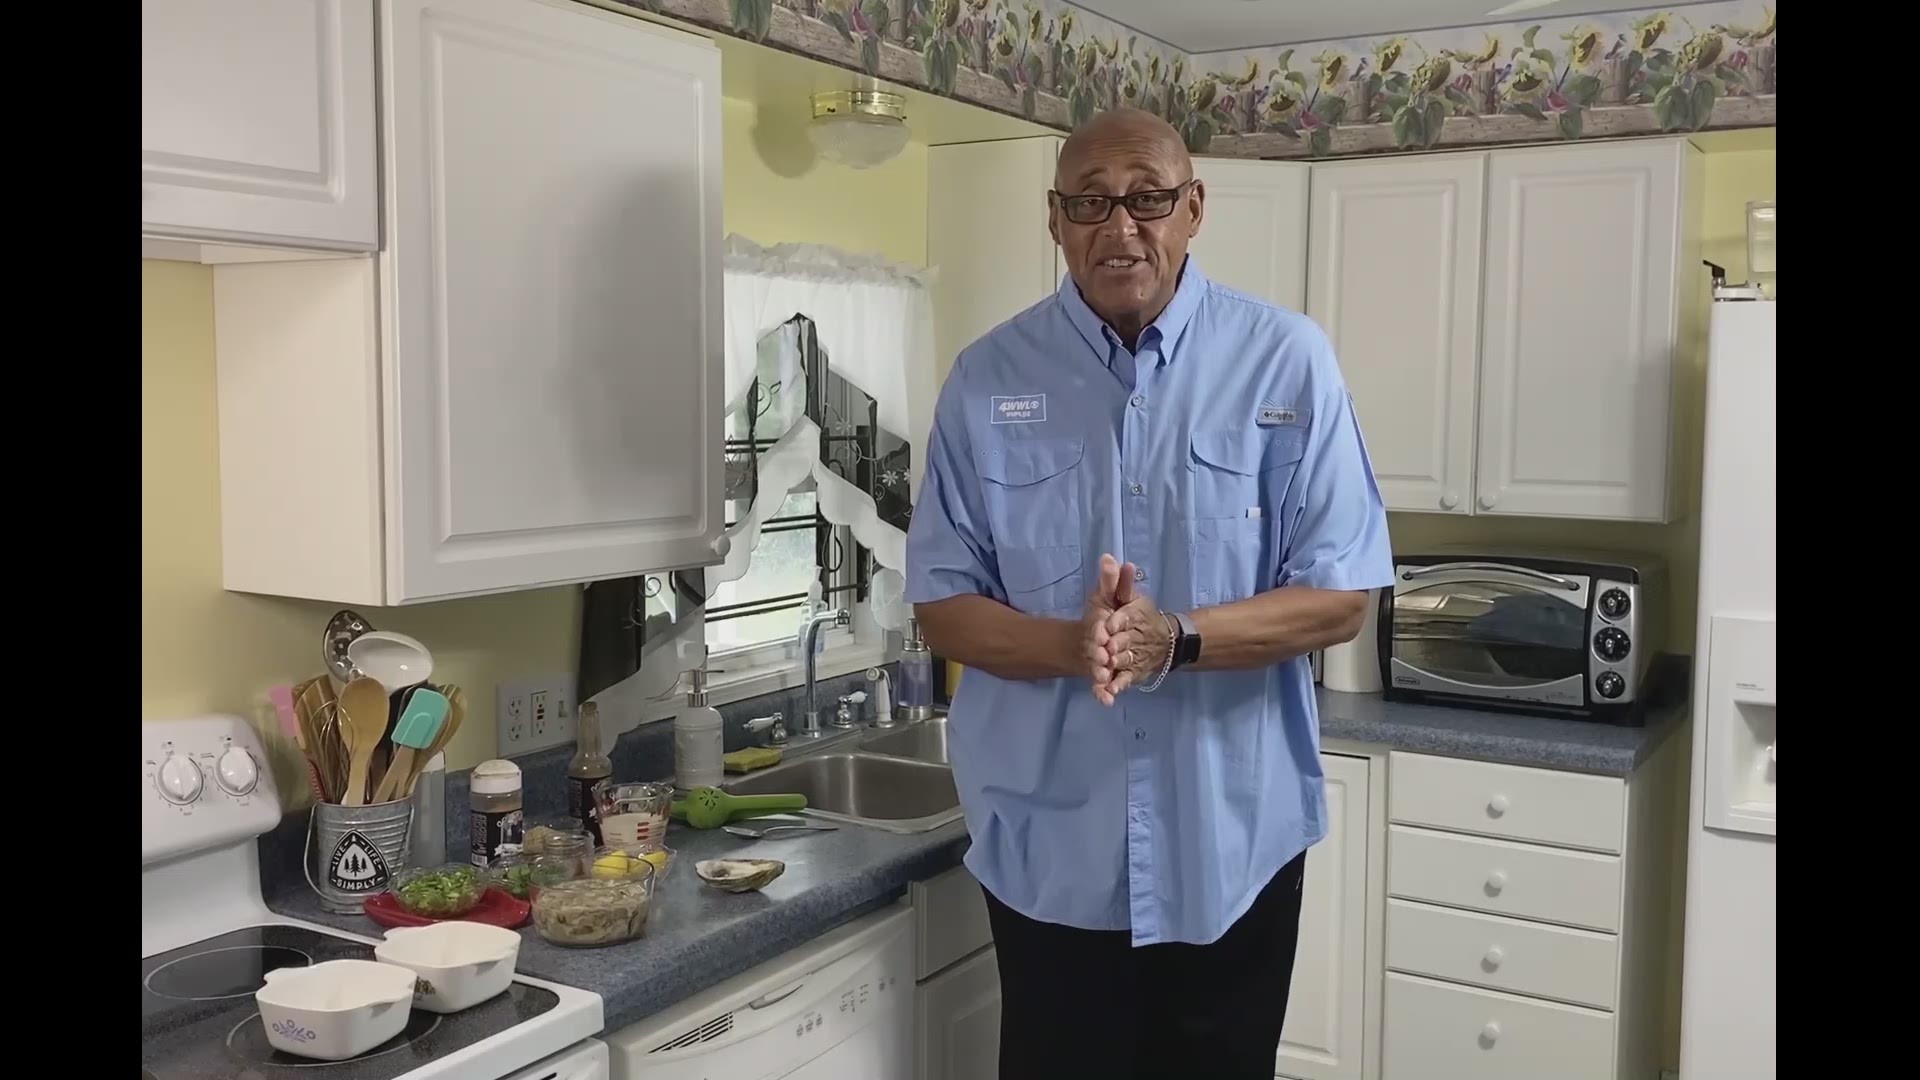 Chef Kevin Belton shares one of his favorite recipes he learned from his mother!